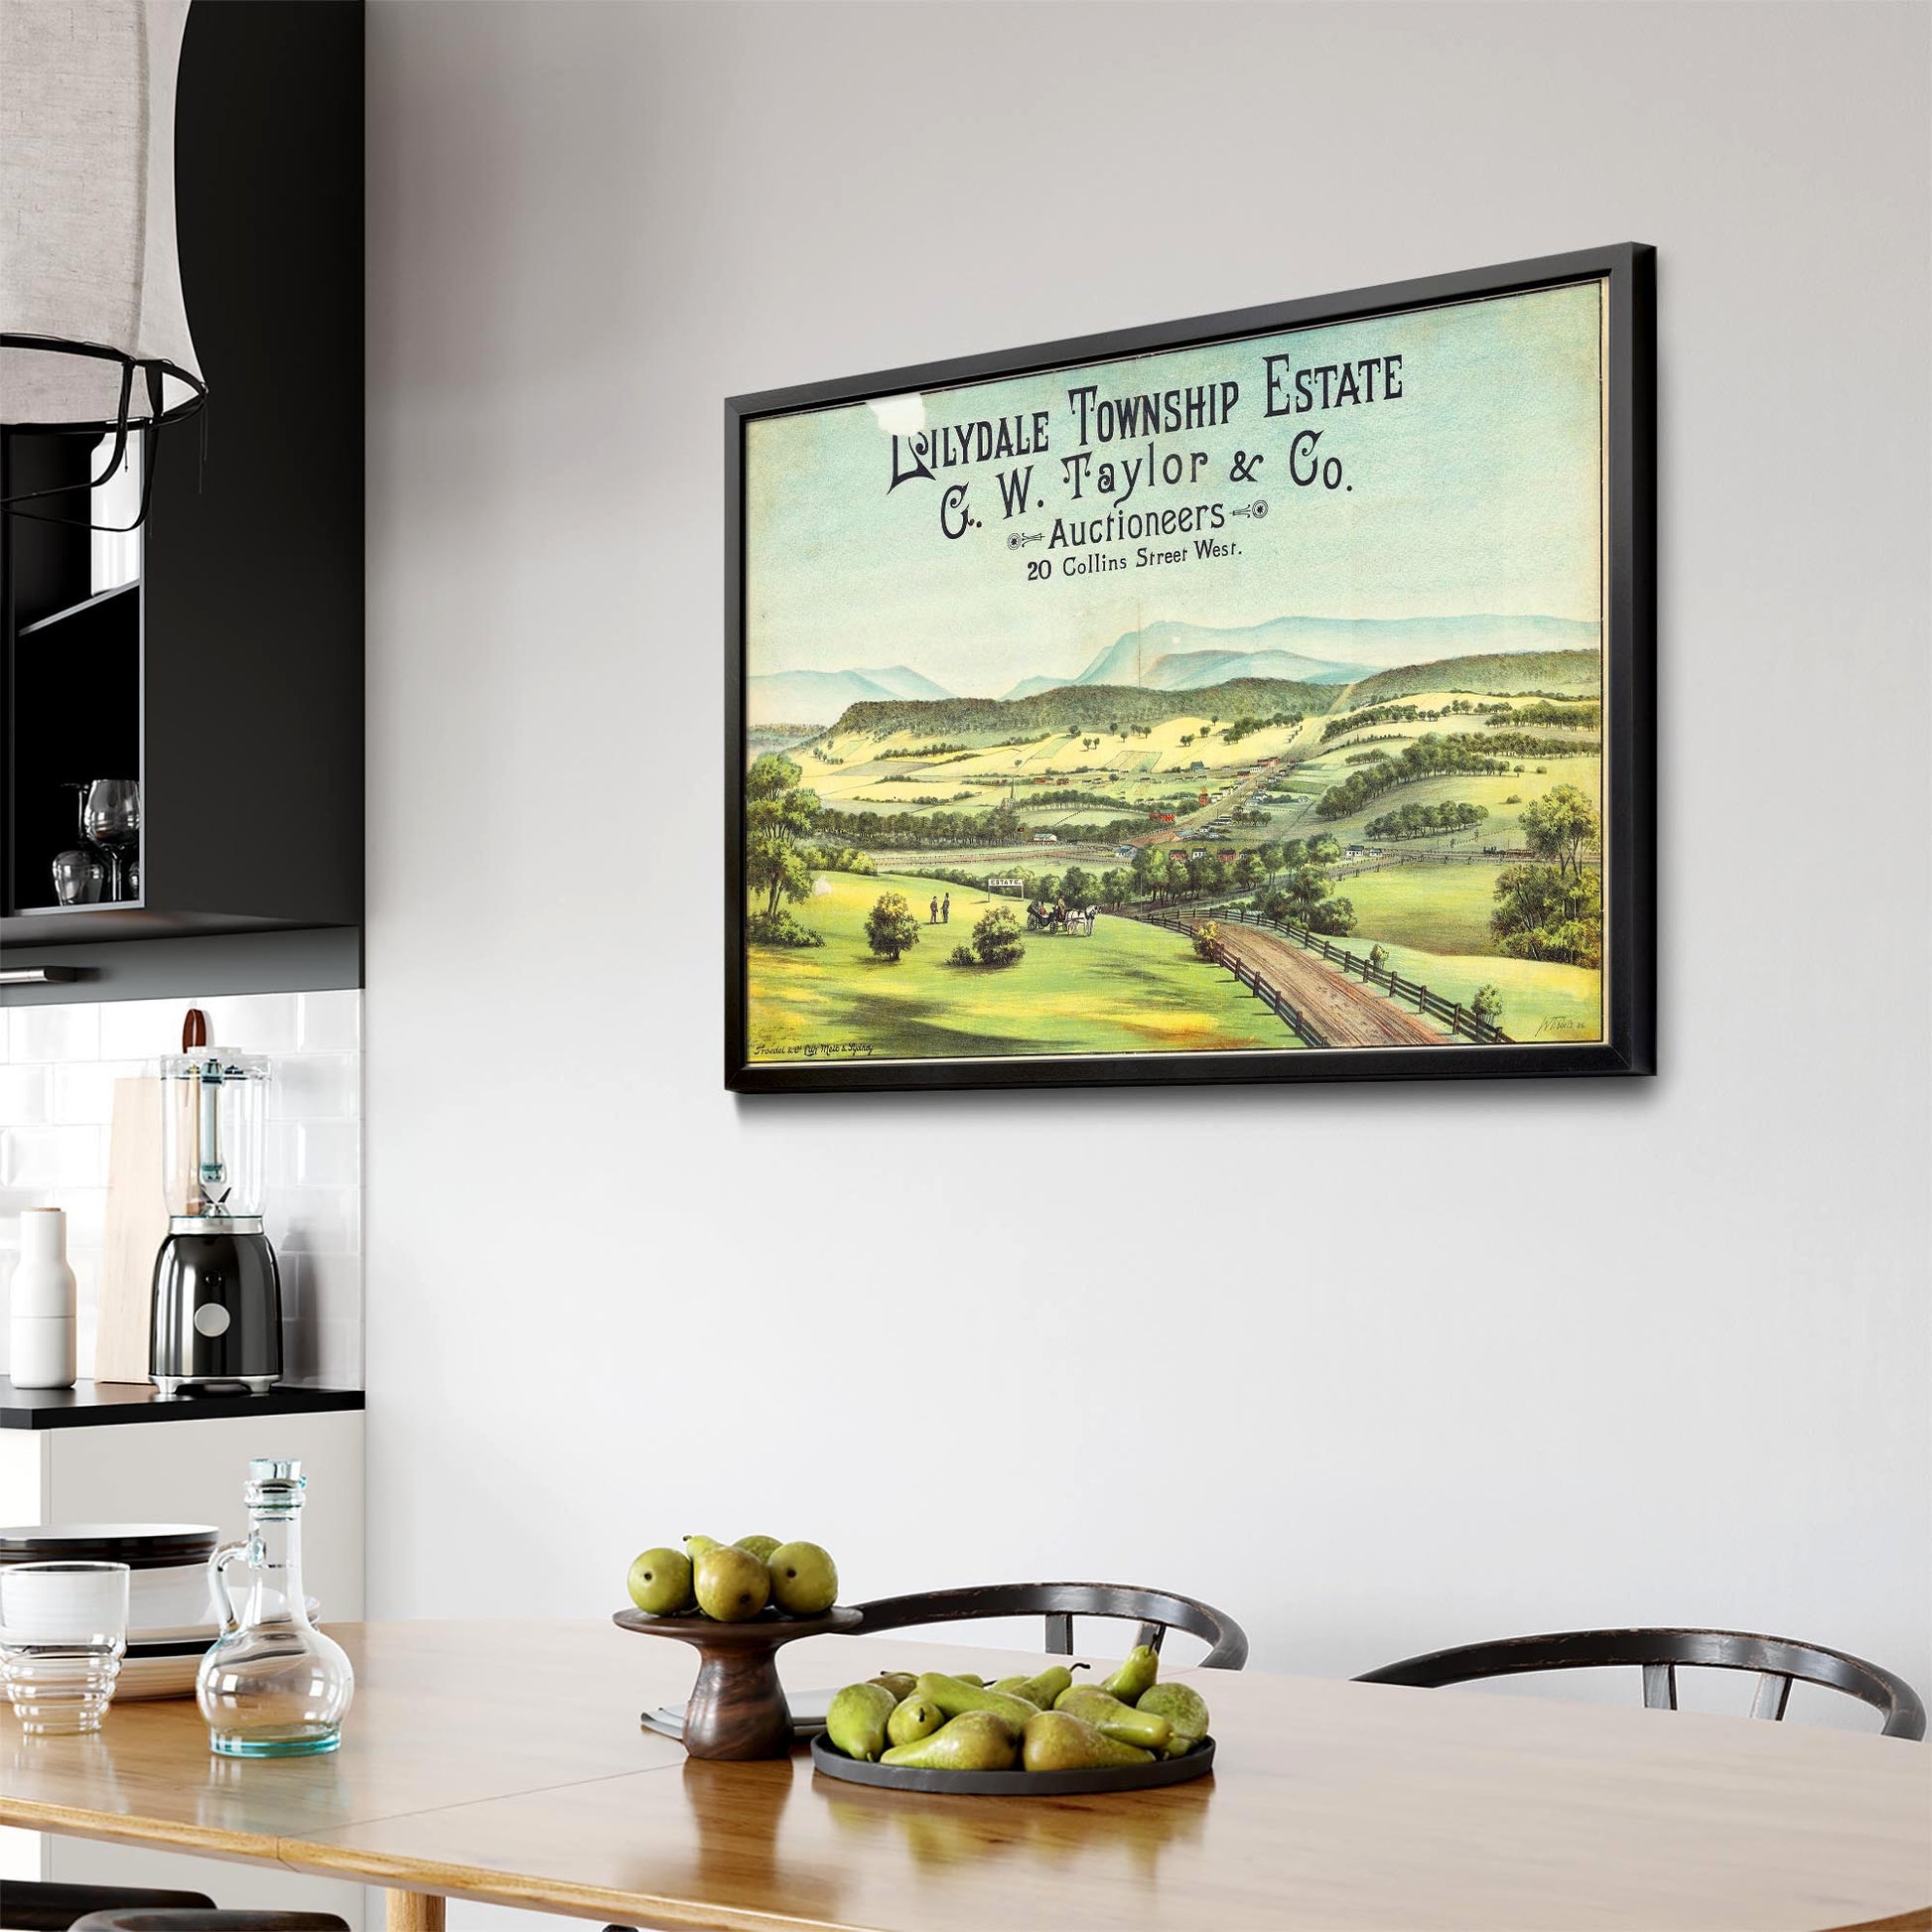 Lilydale Victoria Vintage Real Estate Advert Wall Art #1 - The Affordable Art Company